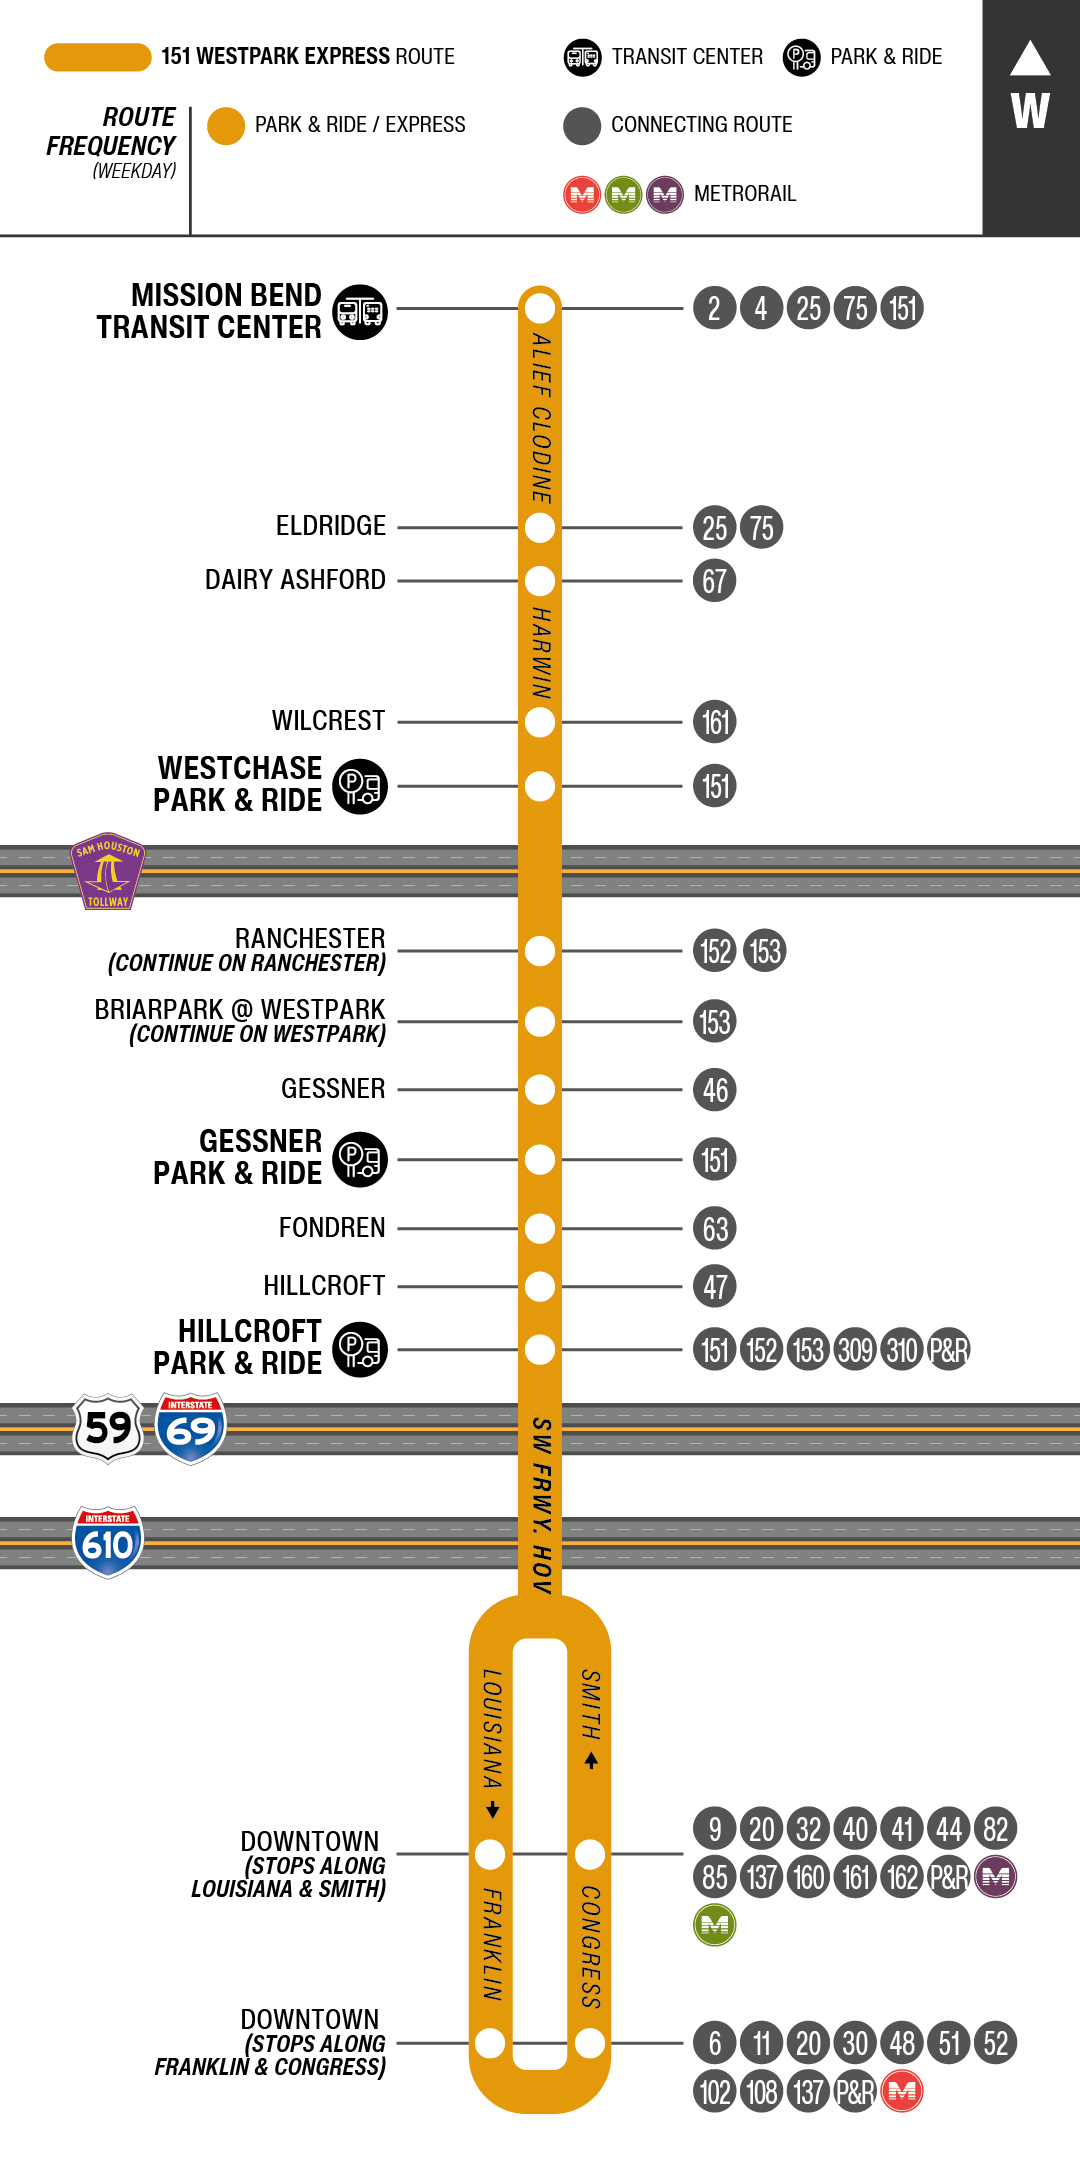 Route map for 151 Westpark Express bus